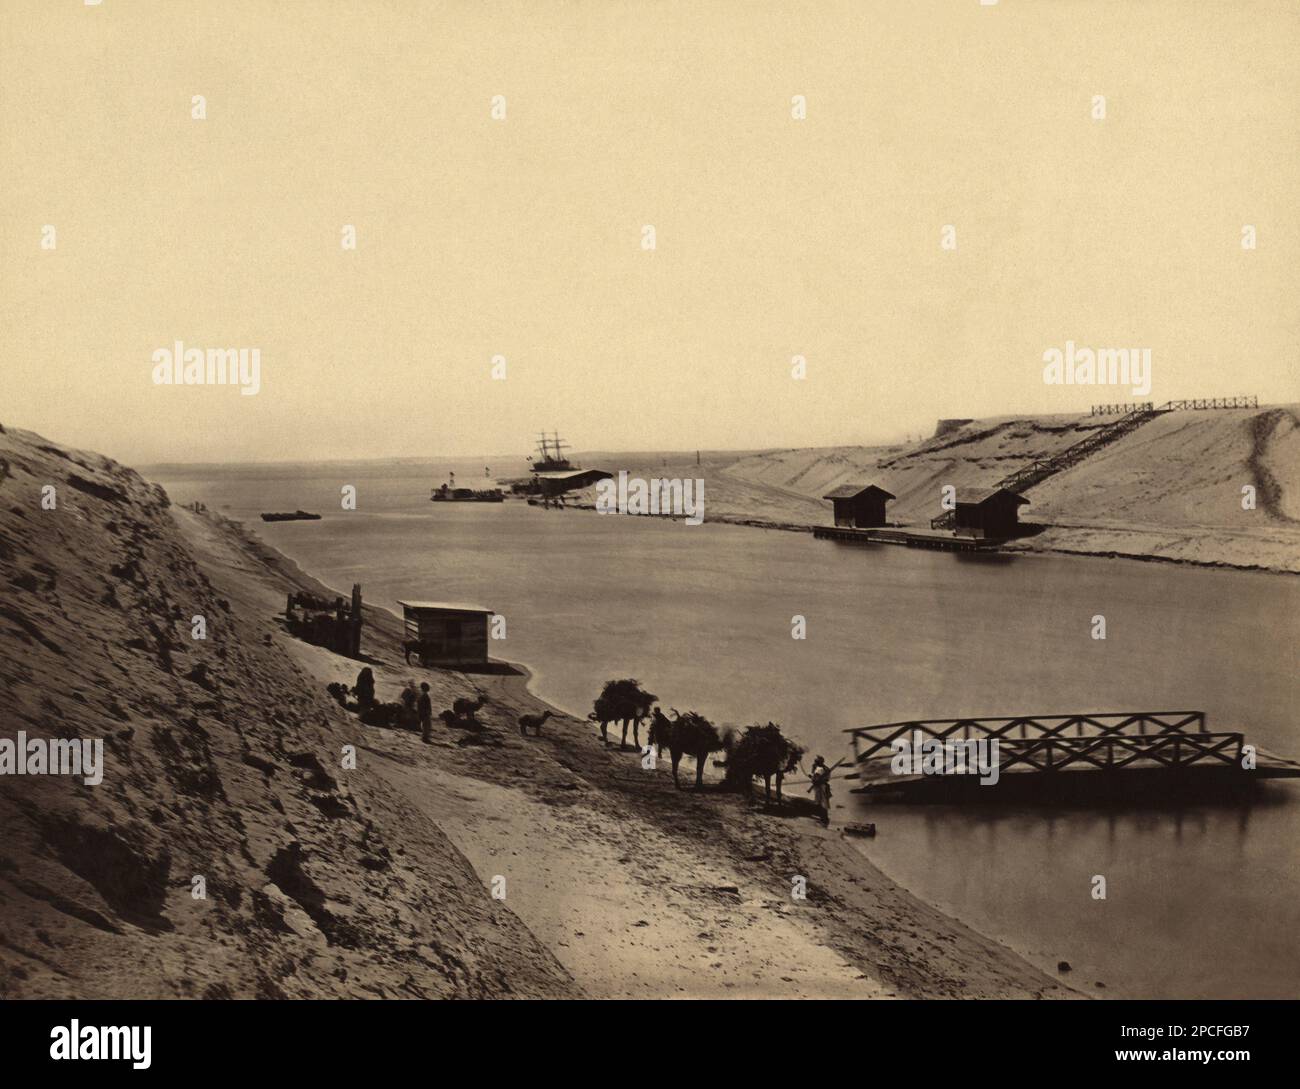 1860 ca, SUEZ , EGYPT:  The SUEZ CANAL . Lake Timsah , from opposite the Chalet of the Viceroy . Photo by Francis Frith . Opened in November 1869, it allows water transportation between Europe and Asia without navigating around Africa or carrying goods overland between the Mediterranean and the Red Sea. The northern terminus is Port Said, with the southern terminus being near Suez. Ismailia is located halfway between Port Said and Suez . The canal is owned and maintained by the Suez Canal Authority (SCA) of the Arab Republic of Egypt . - ITALIA  - GEOGRAPHY - GEOGRAFIA - FOTO STORICHE - HISTOR Stock Photo